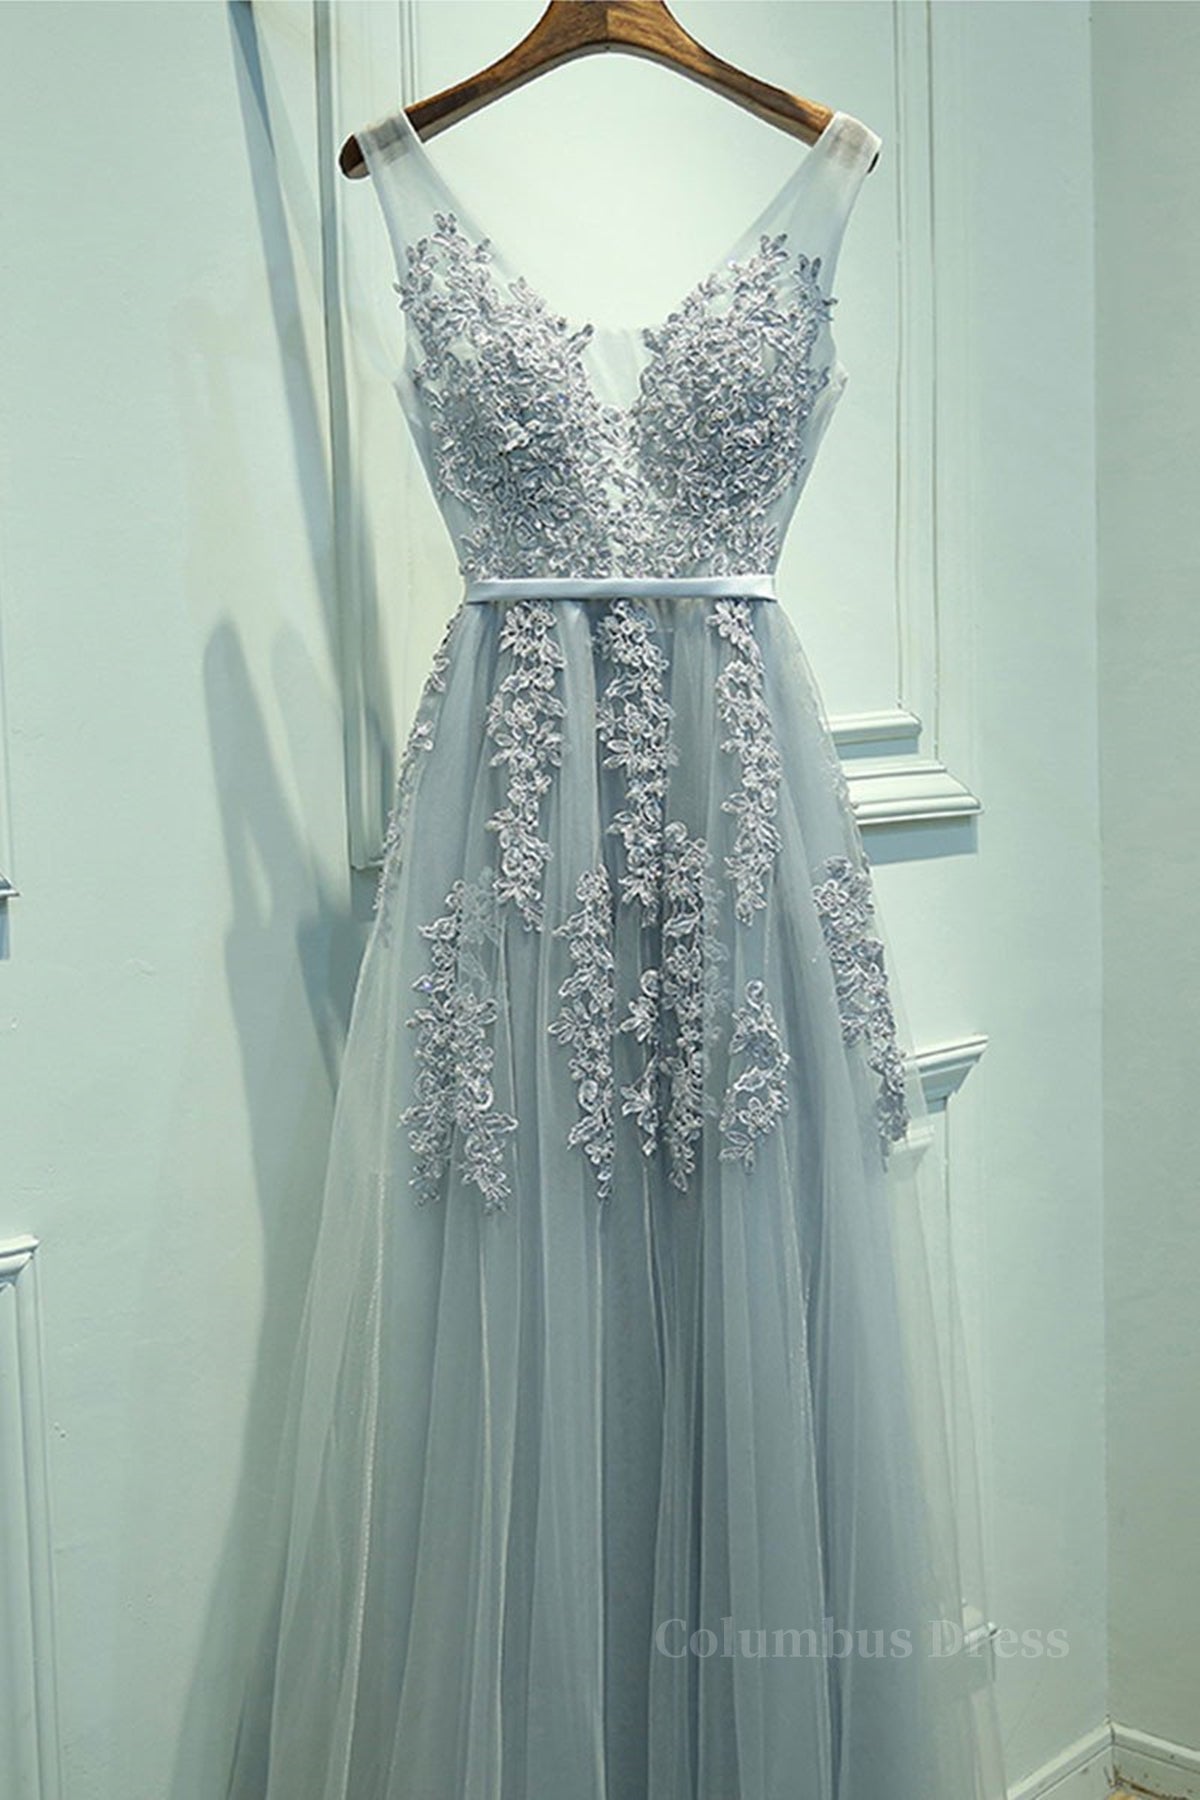 Party Dress Baby, A Line V Neck Silver Gray Lace Prom Dresses, Grey Lace Formal Evening Dresses